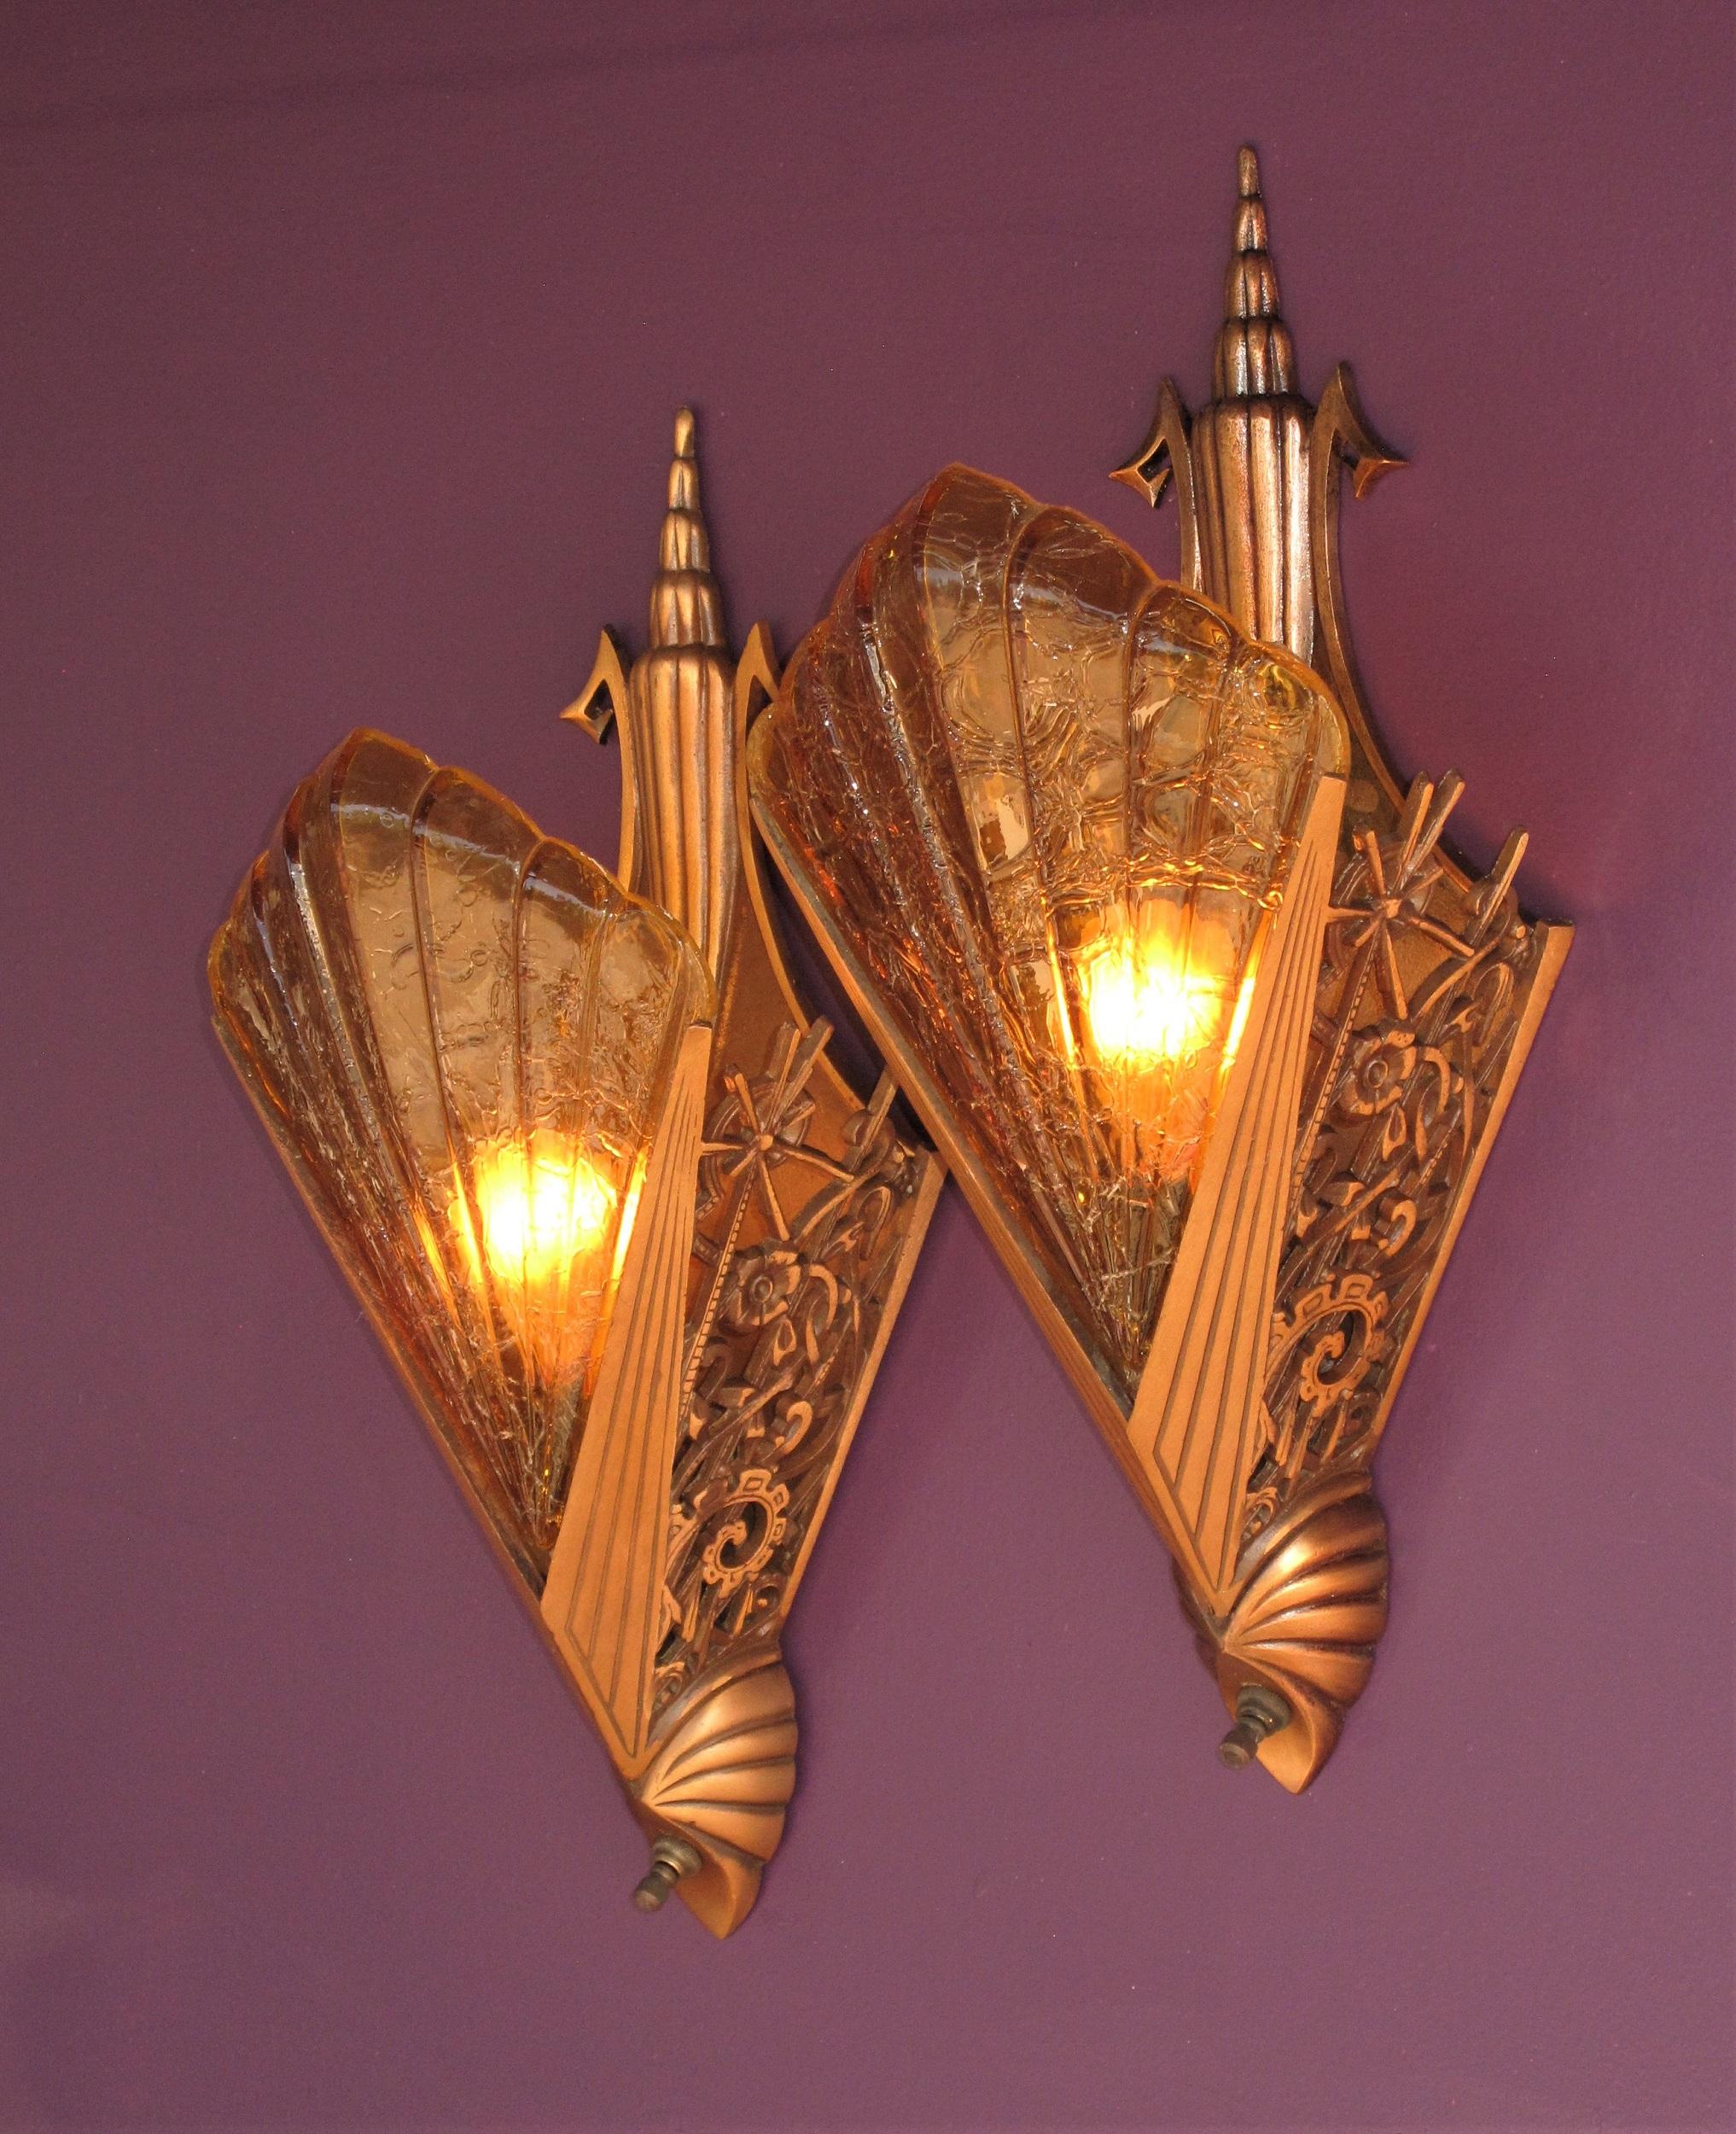 Ultra Deco 30s Pr Bronze Slip Shade Sconces w/ Honey colored shades priced pair In Good Condition For Sale In Prescott, US